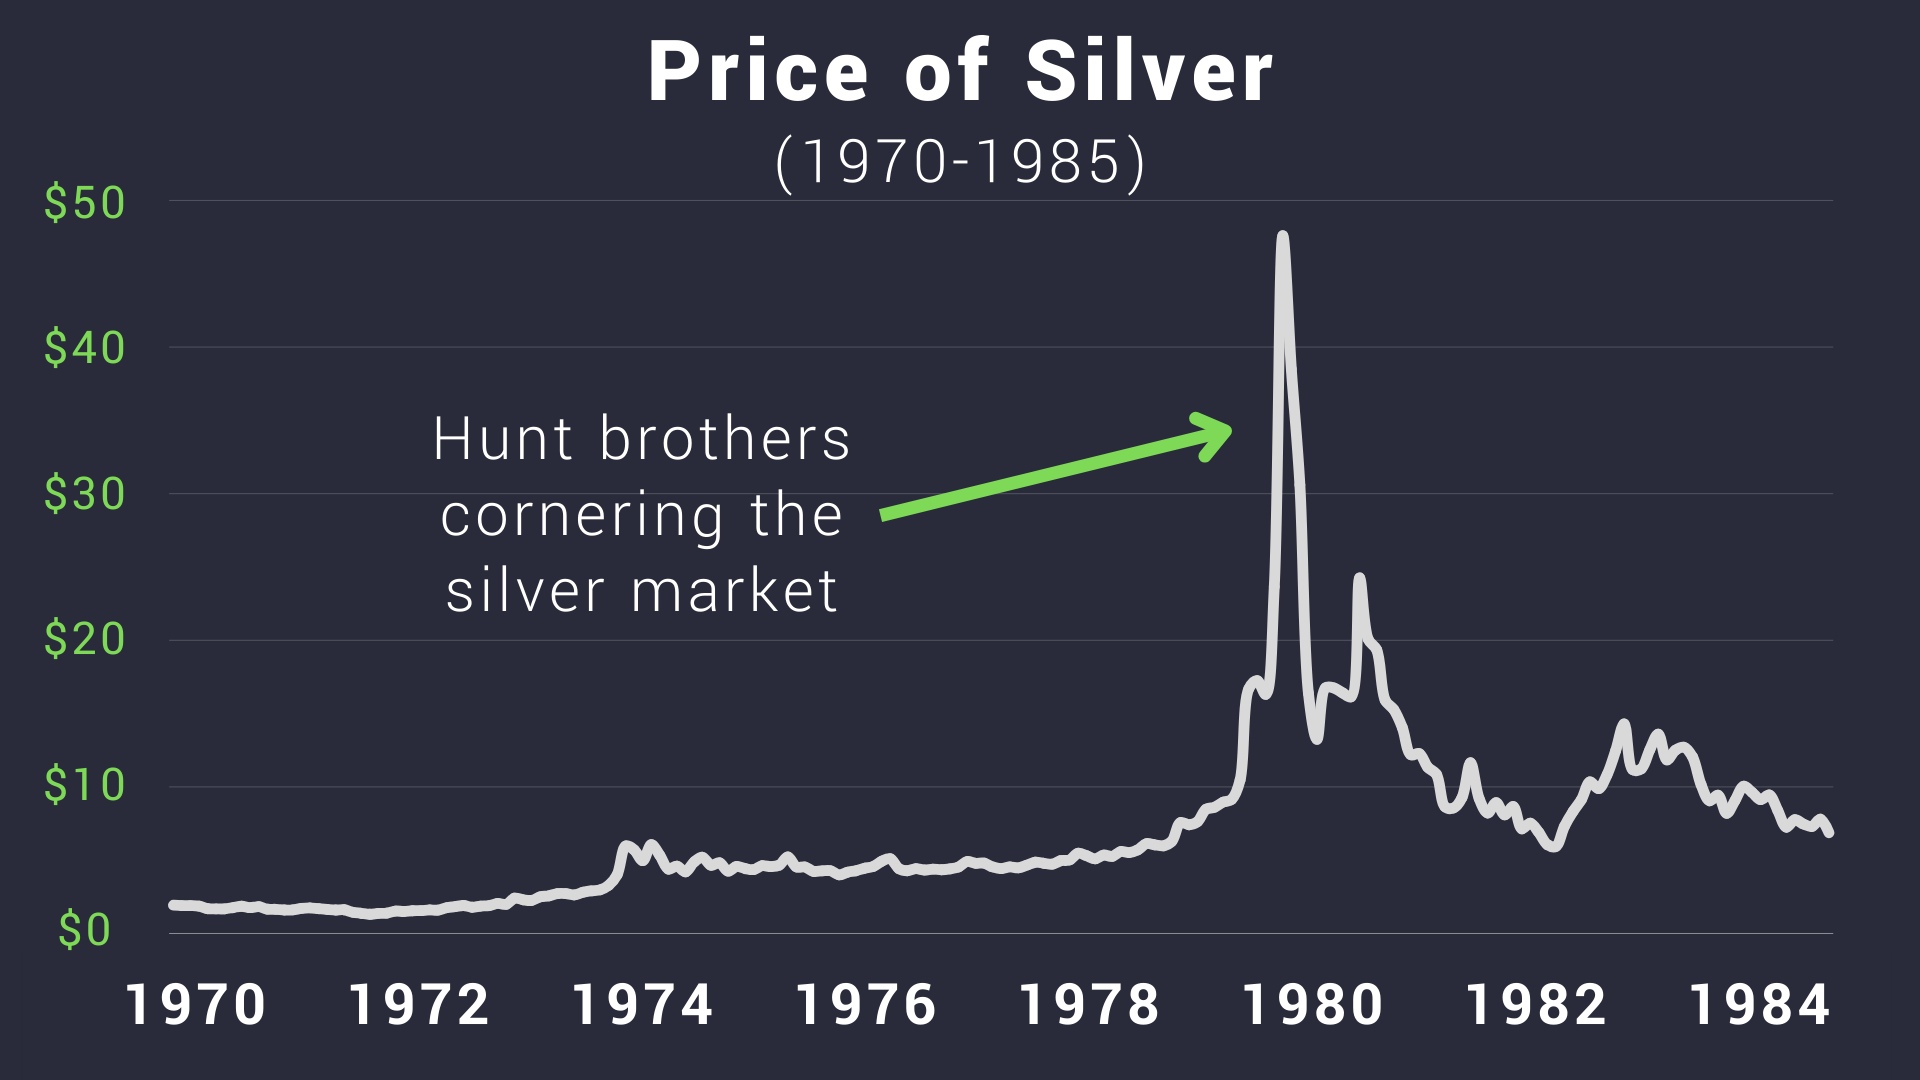 Silver Price from 1970-1985, Hunt brothers cornering the silver market